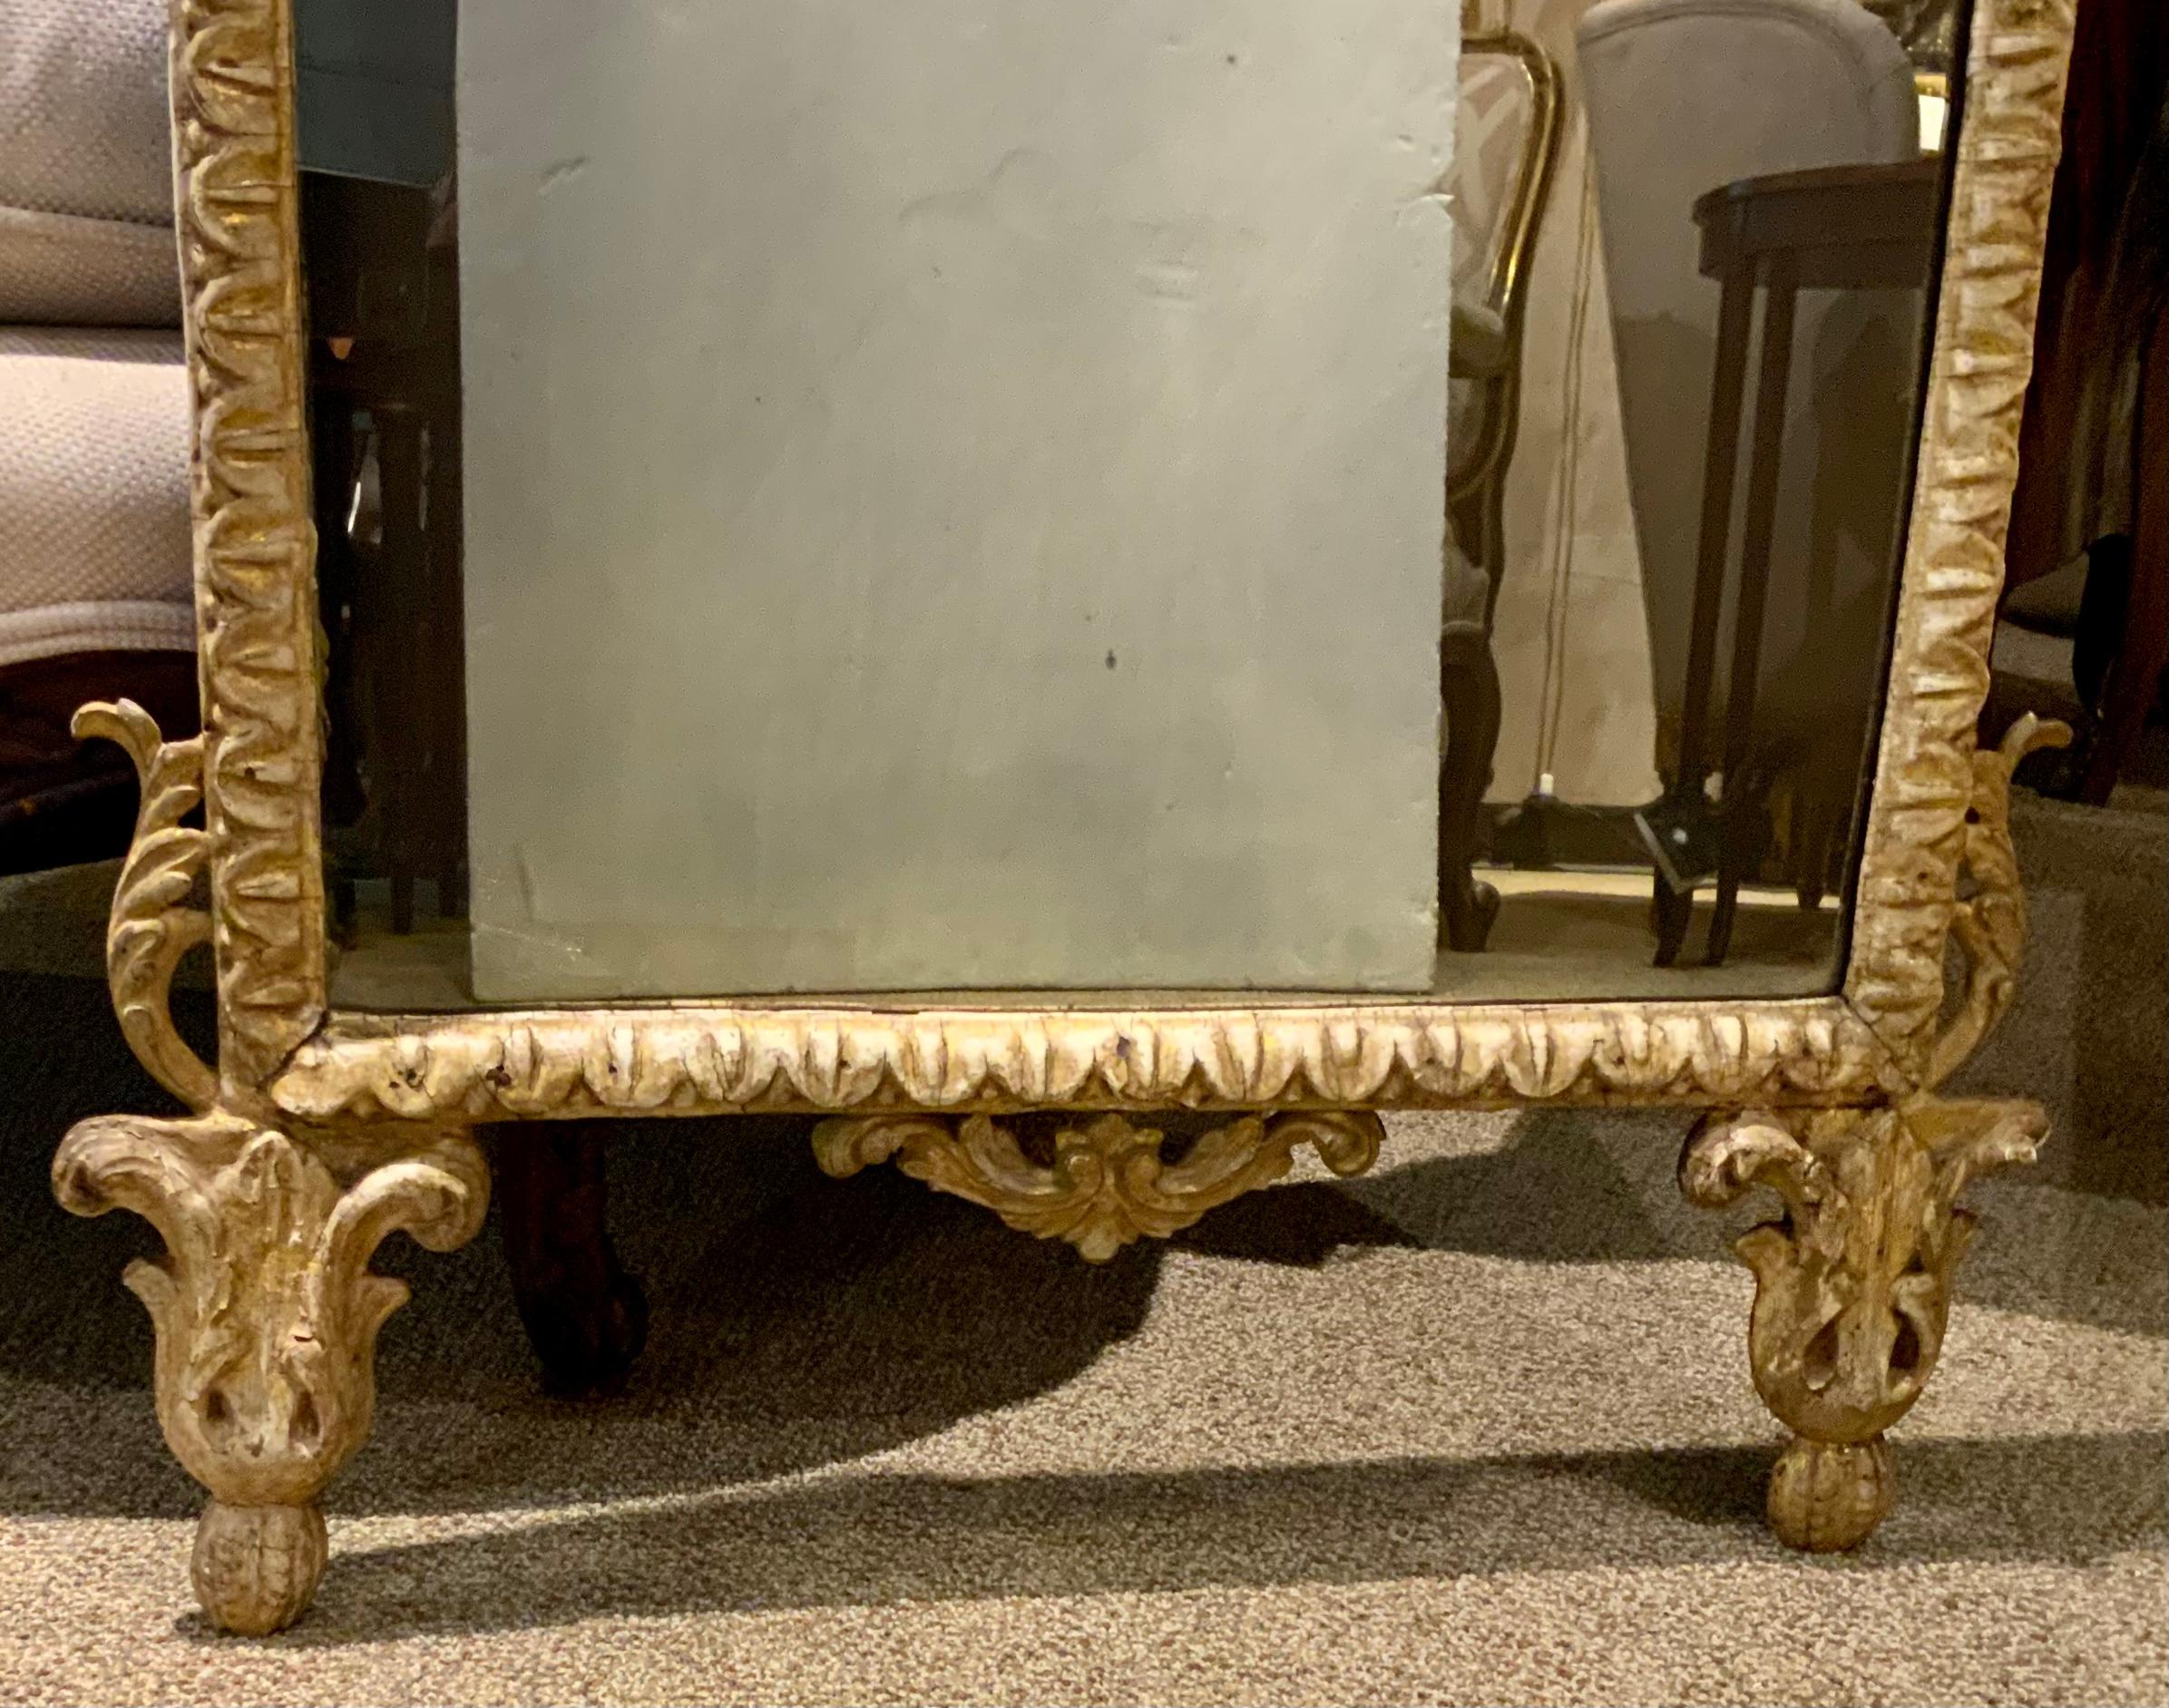 French hand carved and gilt mirror with the original antique mirror plate
Make this a very special piece.  The mirror plate is aged and cloudy
Which shows its beautiful age. The oval shaped mirror is centered at
The crest with a lovely bow motif